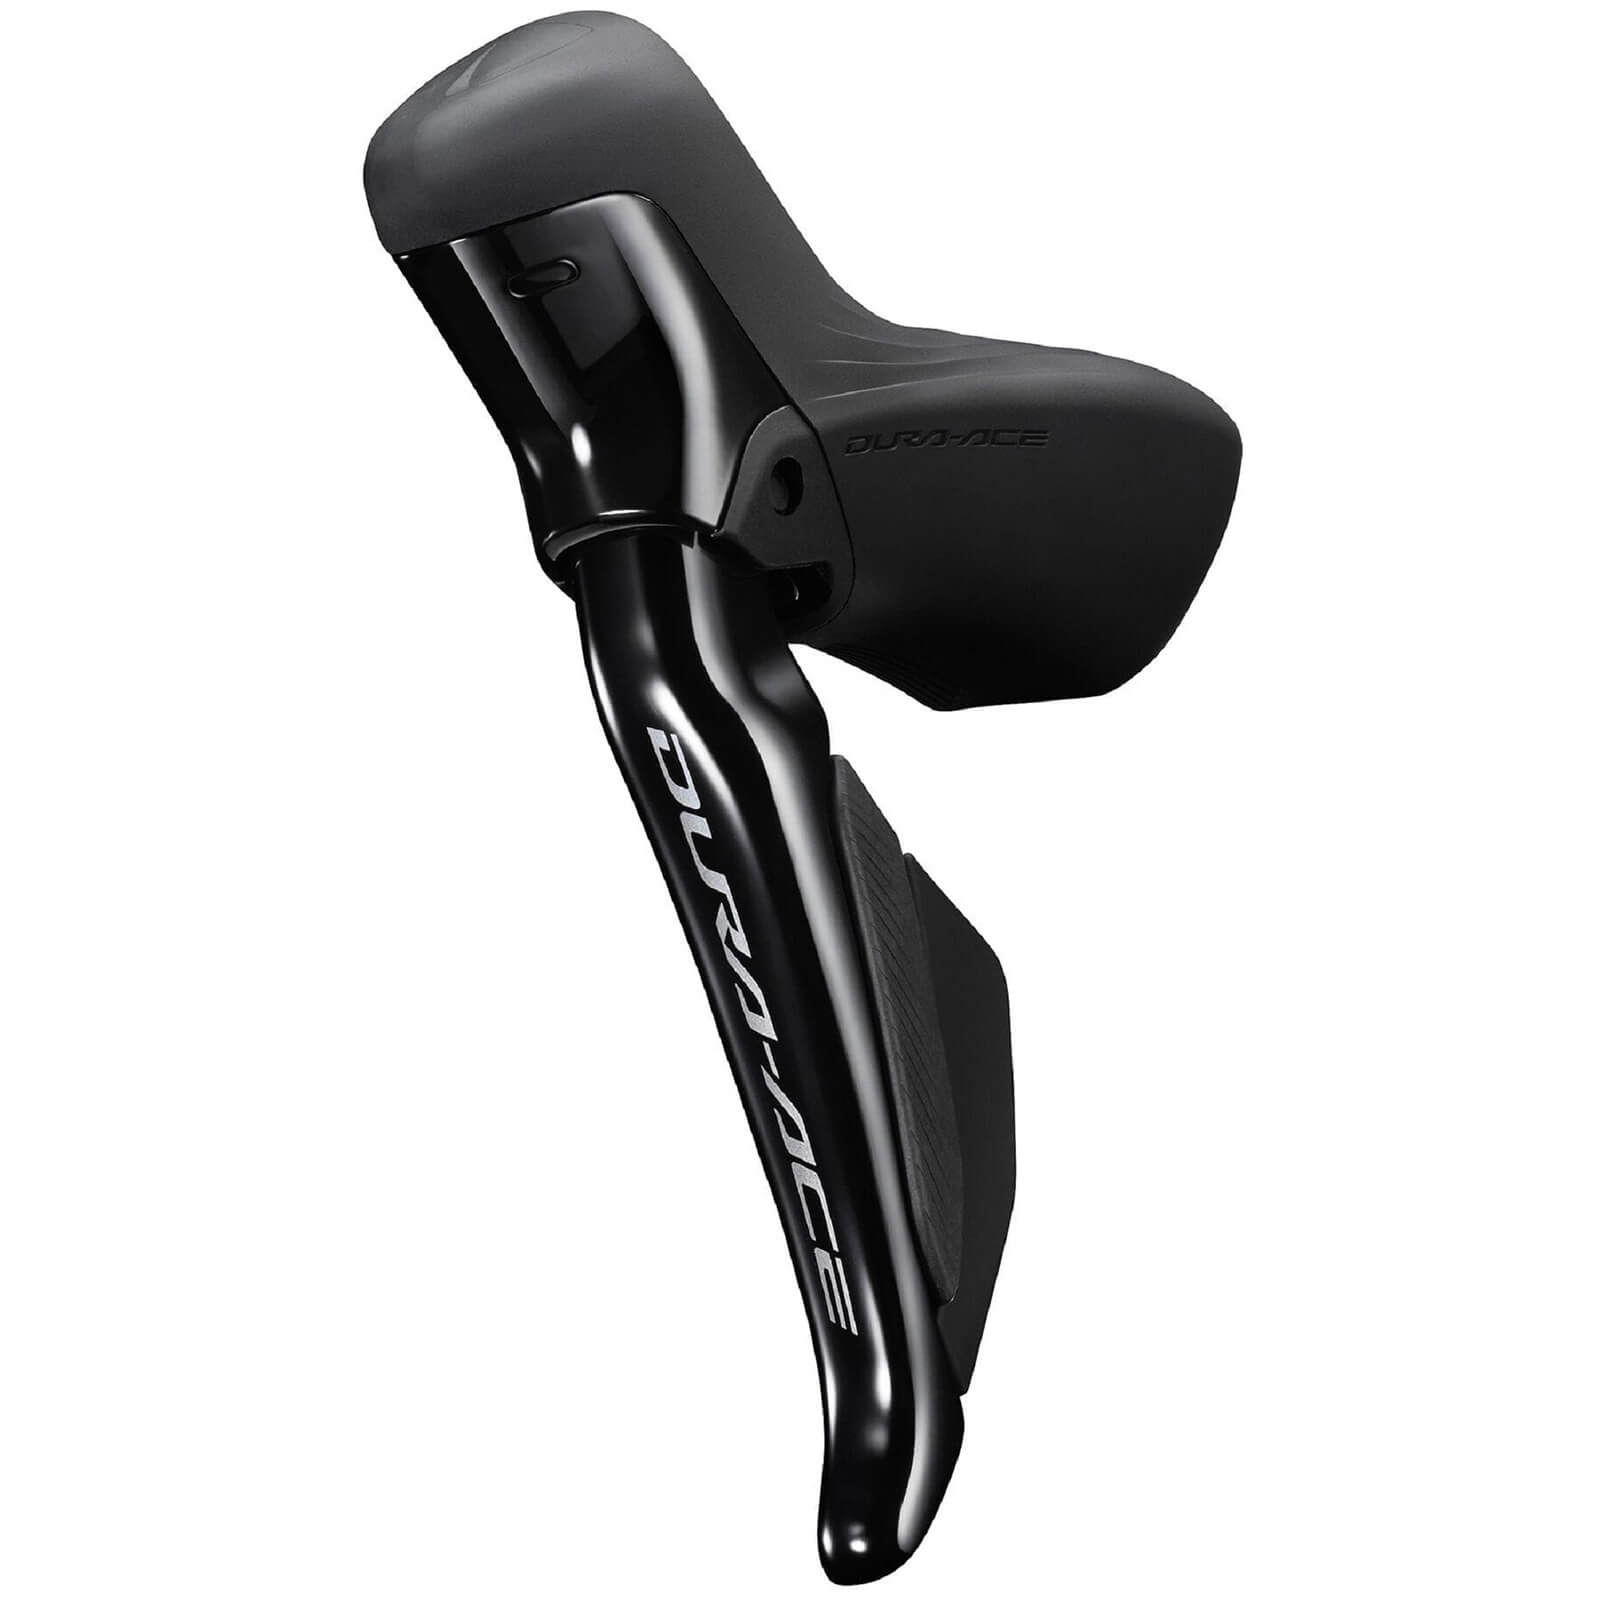 Shimano Dura-Ace ST-R9270 Gear Shift Lever - Left Hand